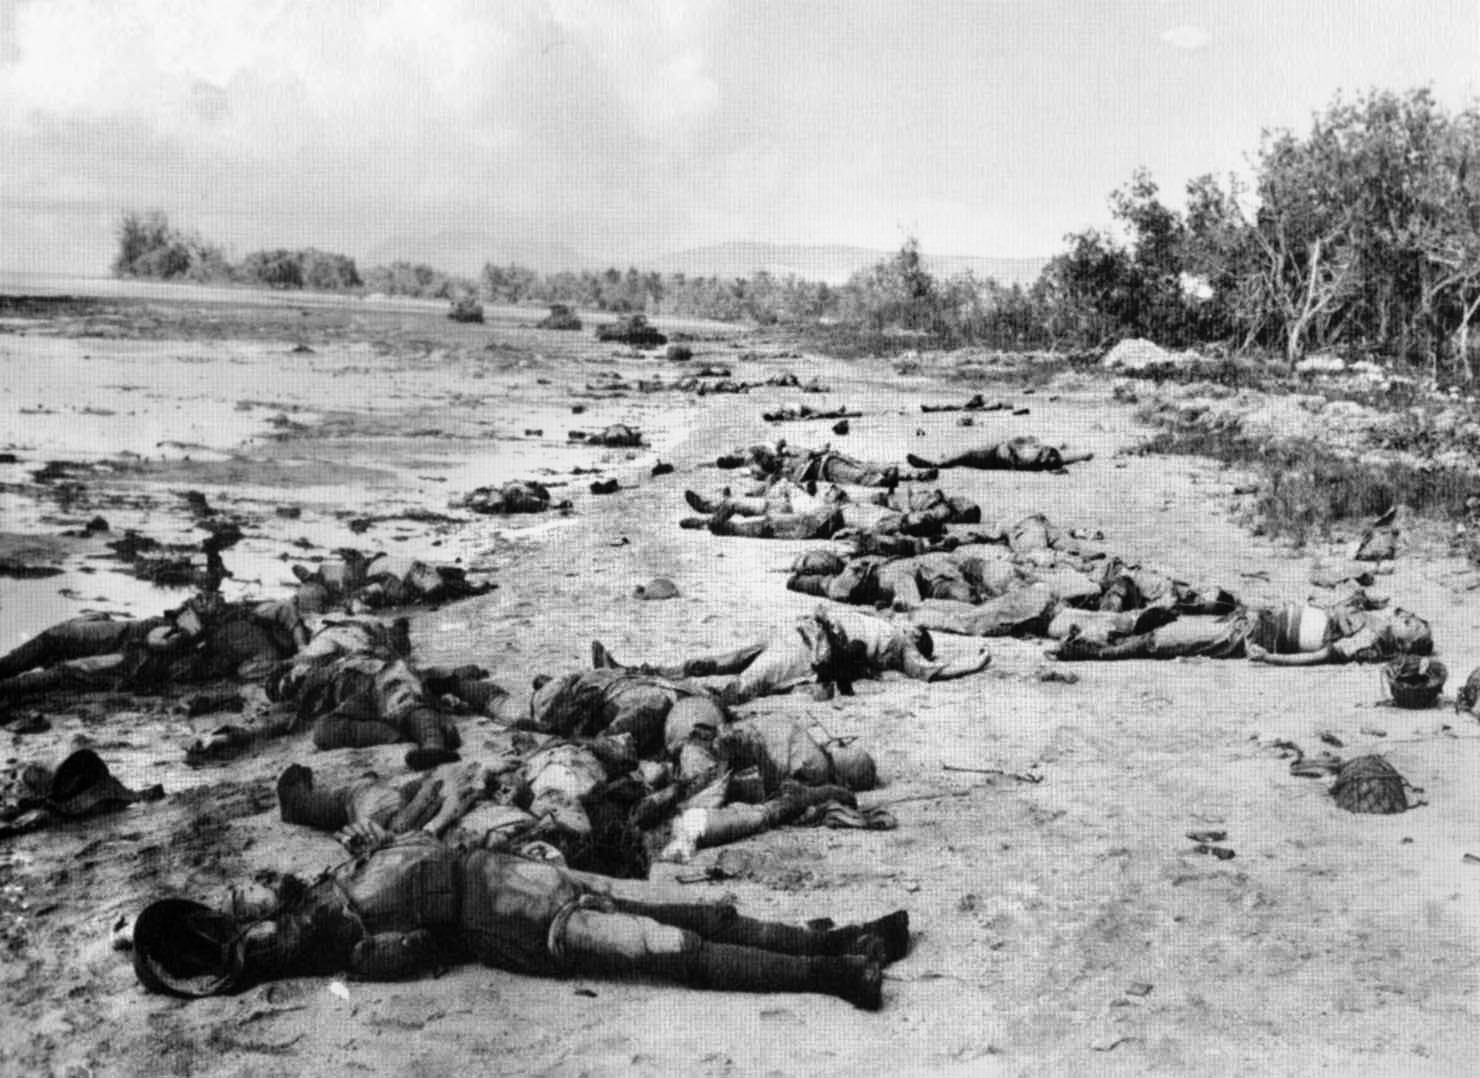 The Japanese executed a suicidal Banzai charge against the American lines on Saipan and paid a tremendous price, the bodies of their dead littering the beach. This photo is believed to have been taken in the aftermath of the charge that decimated their remaining forces on the island.